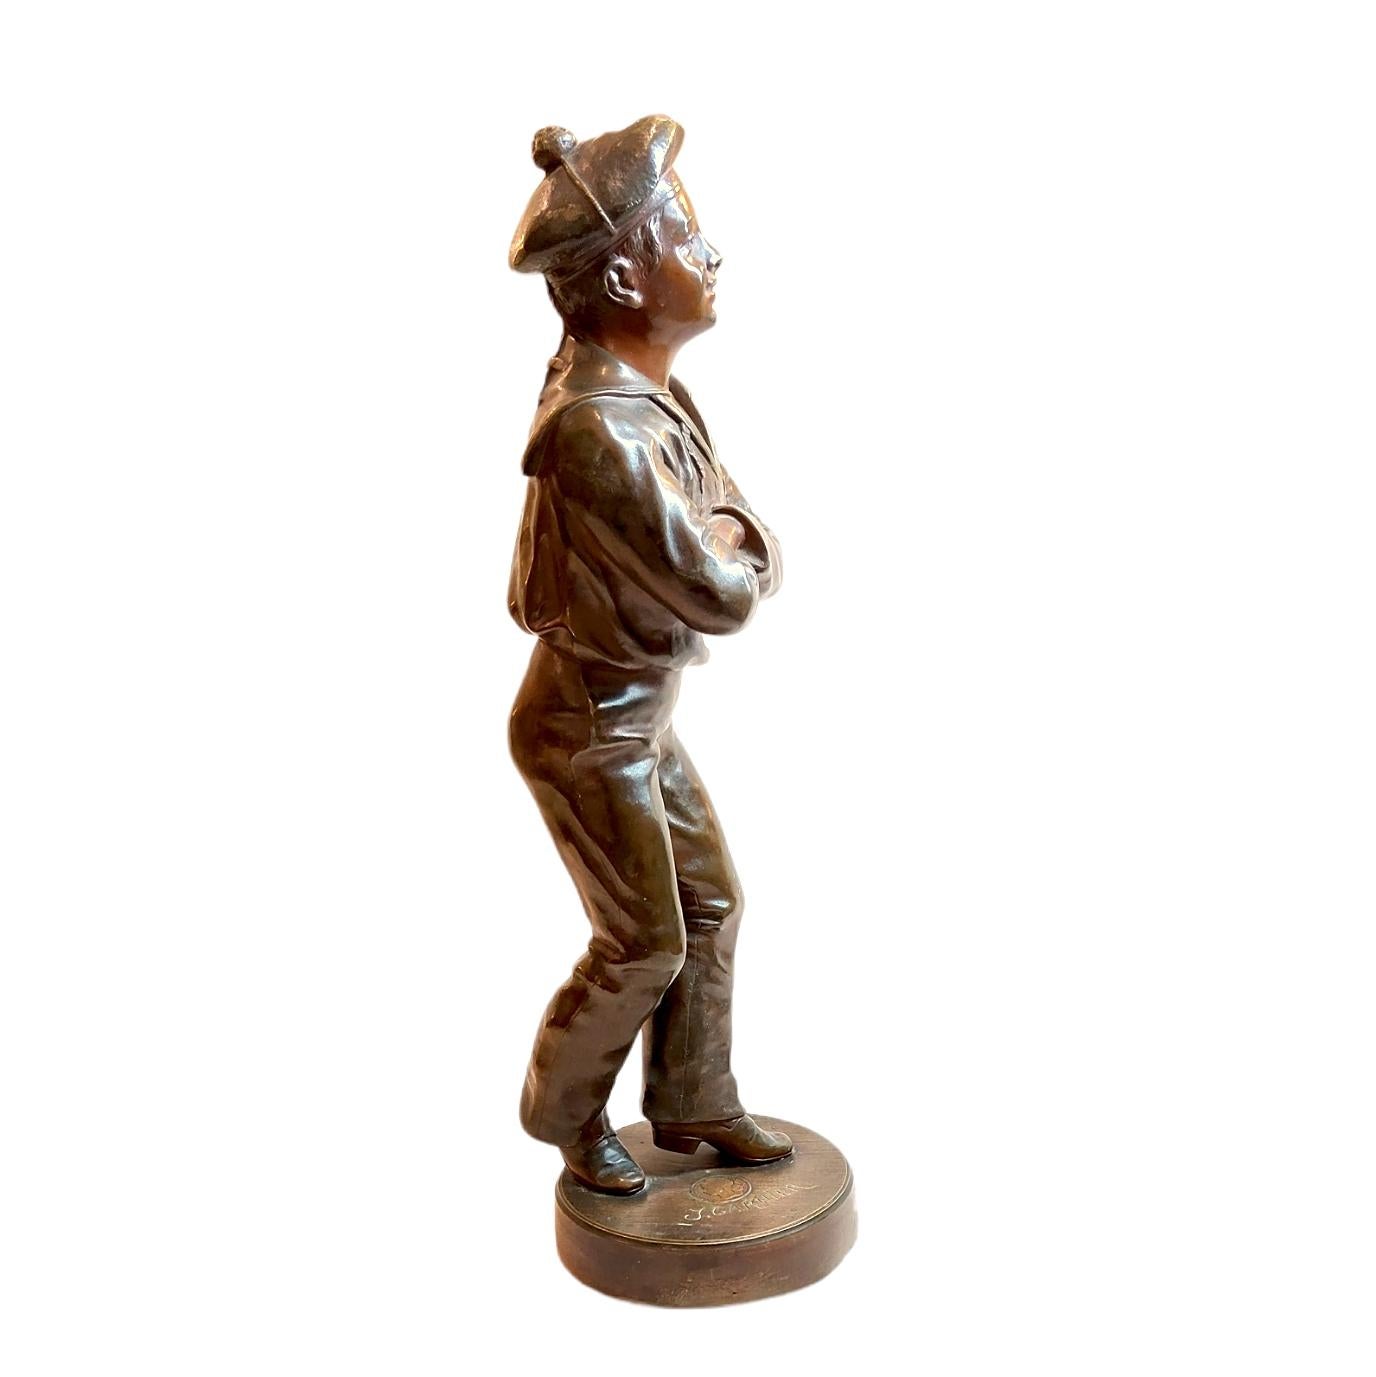 J. GARNIER: a charming BRONZE FIGURE of a young sailor-boy, dressed in 